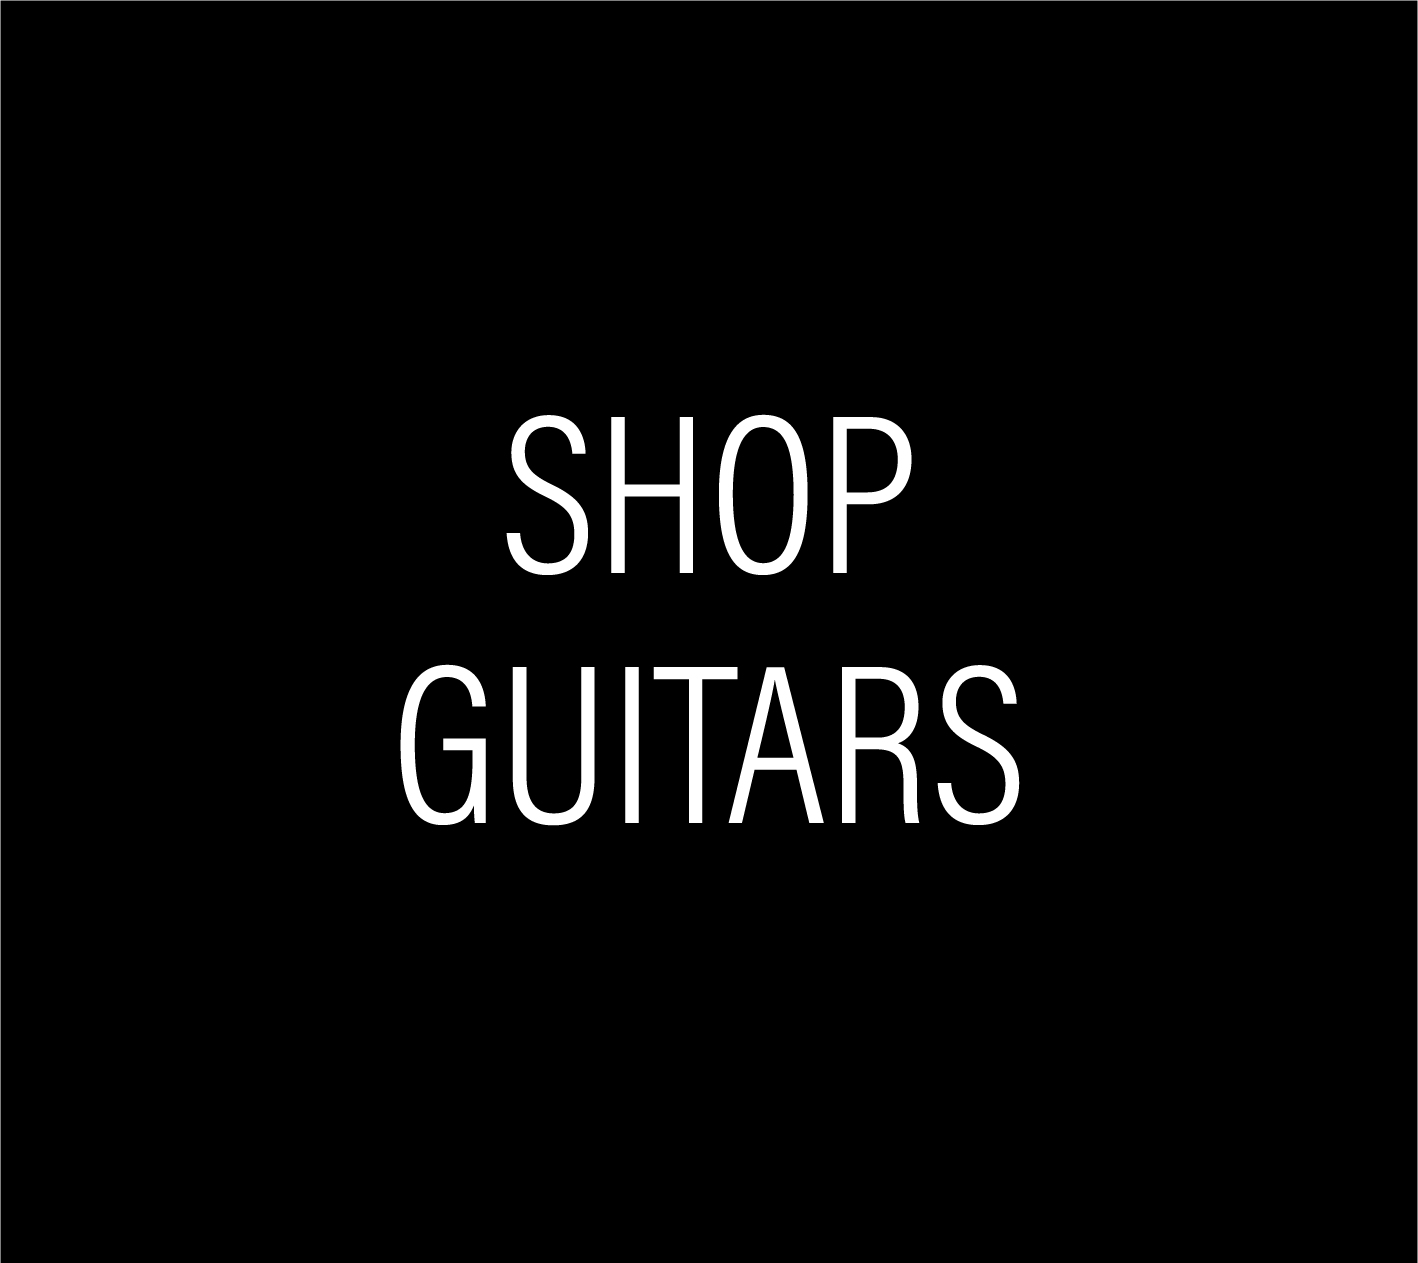 Discover the best selection of guitars at Heid Music! We have all of your favorite brands like Fender, Squier, Breedlove, Martin, Yamaha, Ibanez, Gold Tone, Cordoba, PRS, Guild, Alvarez, Sterling by Music Man, ESP/LTD, and more! Enjoy flexible financing options and explore our wide range of used guitars. We have so many types of fretted instruments such as: electric guitars, acoustic guitars, bass guitars, ukuleles, folk instruments, fretted accessories, effects pedals and more!